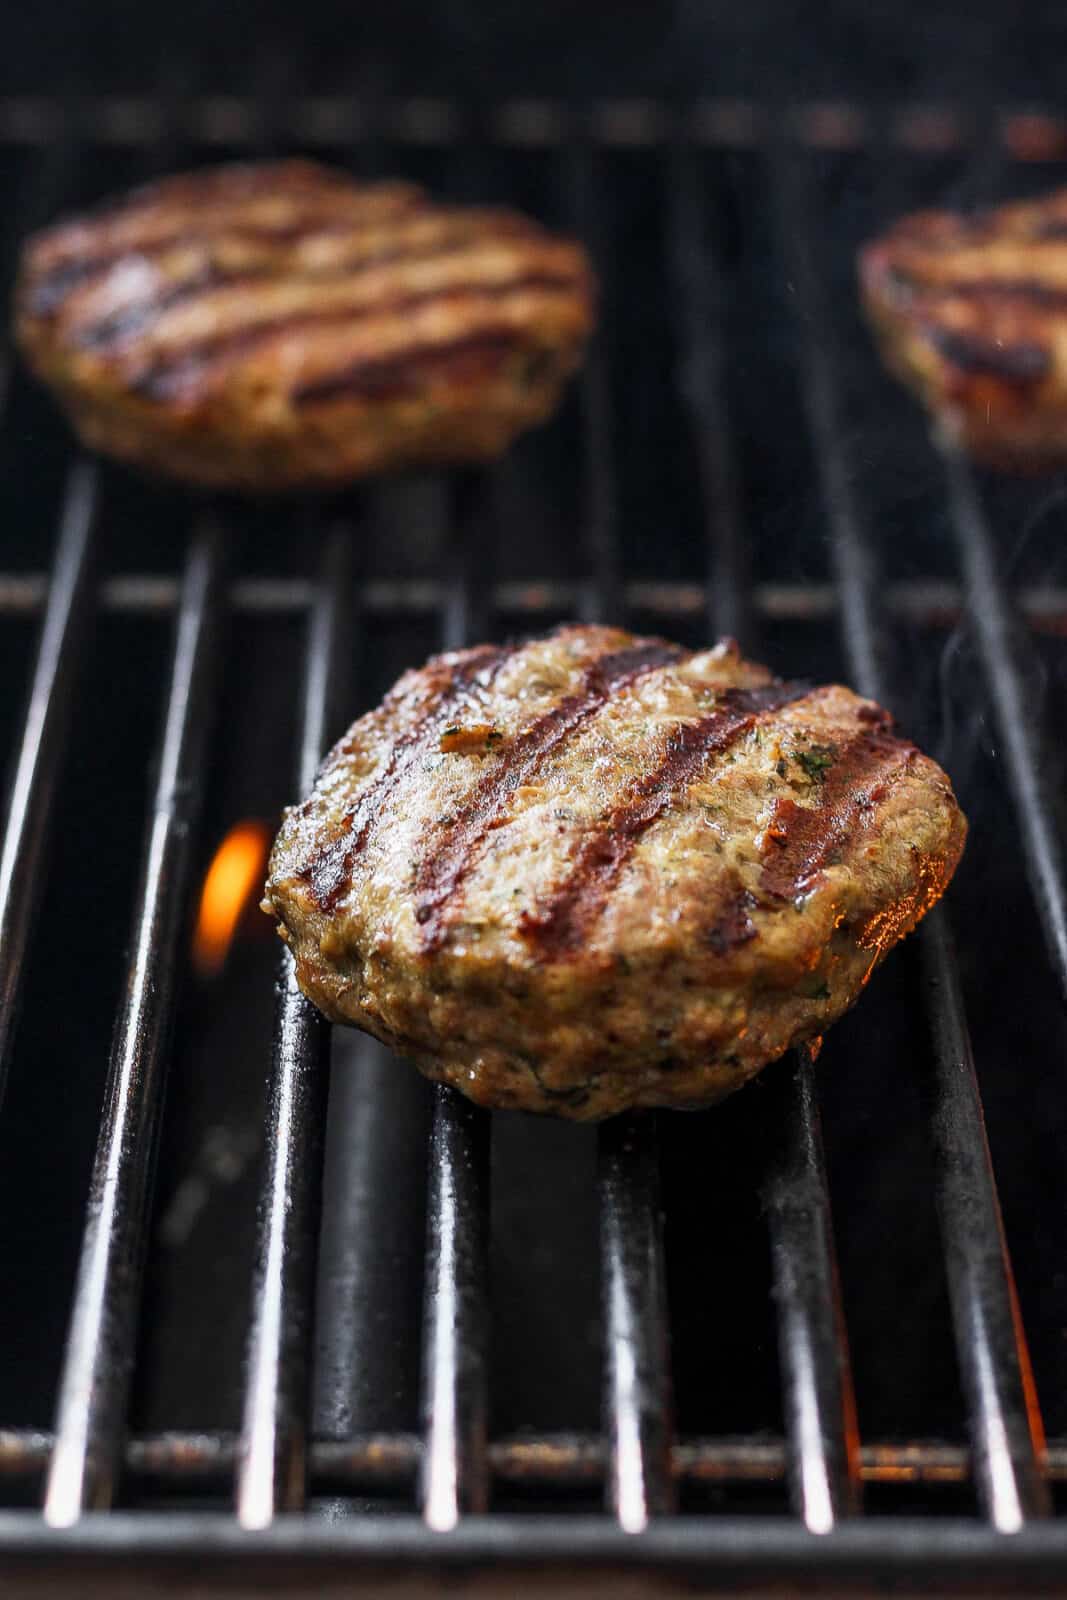 A lamb burger on the grill.